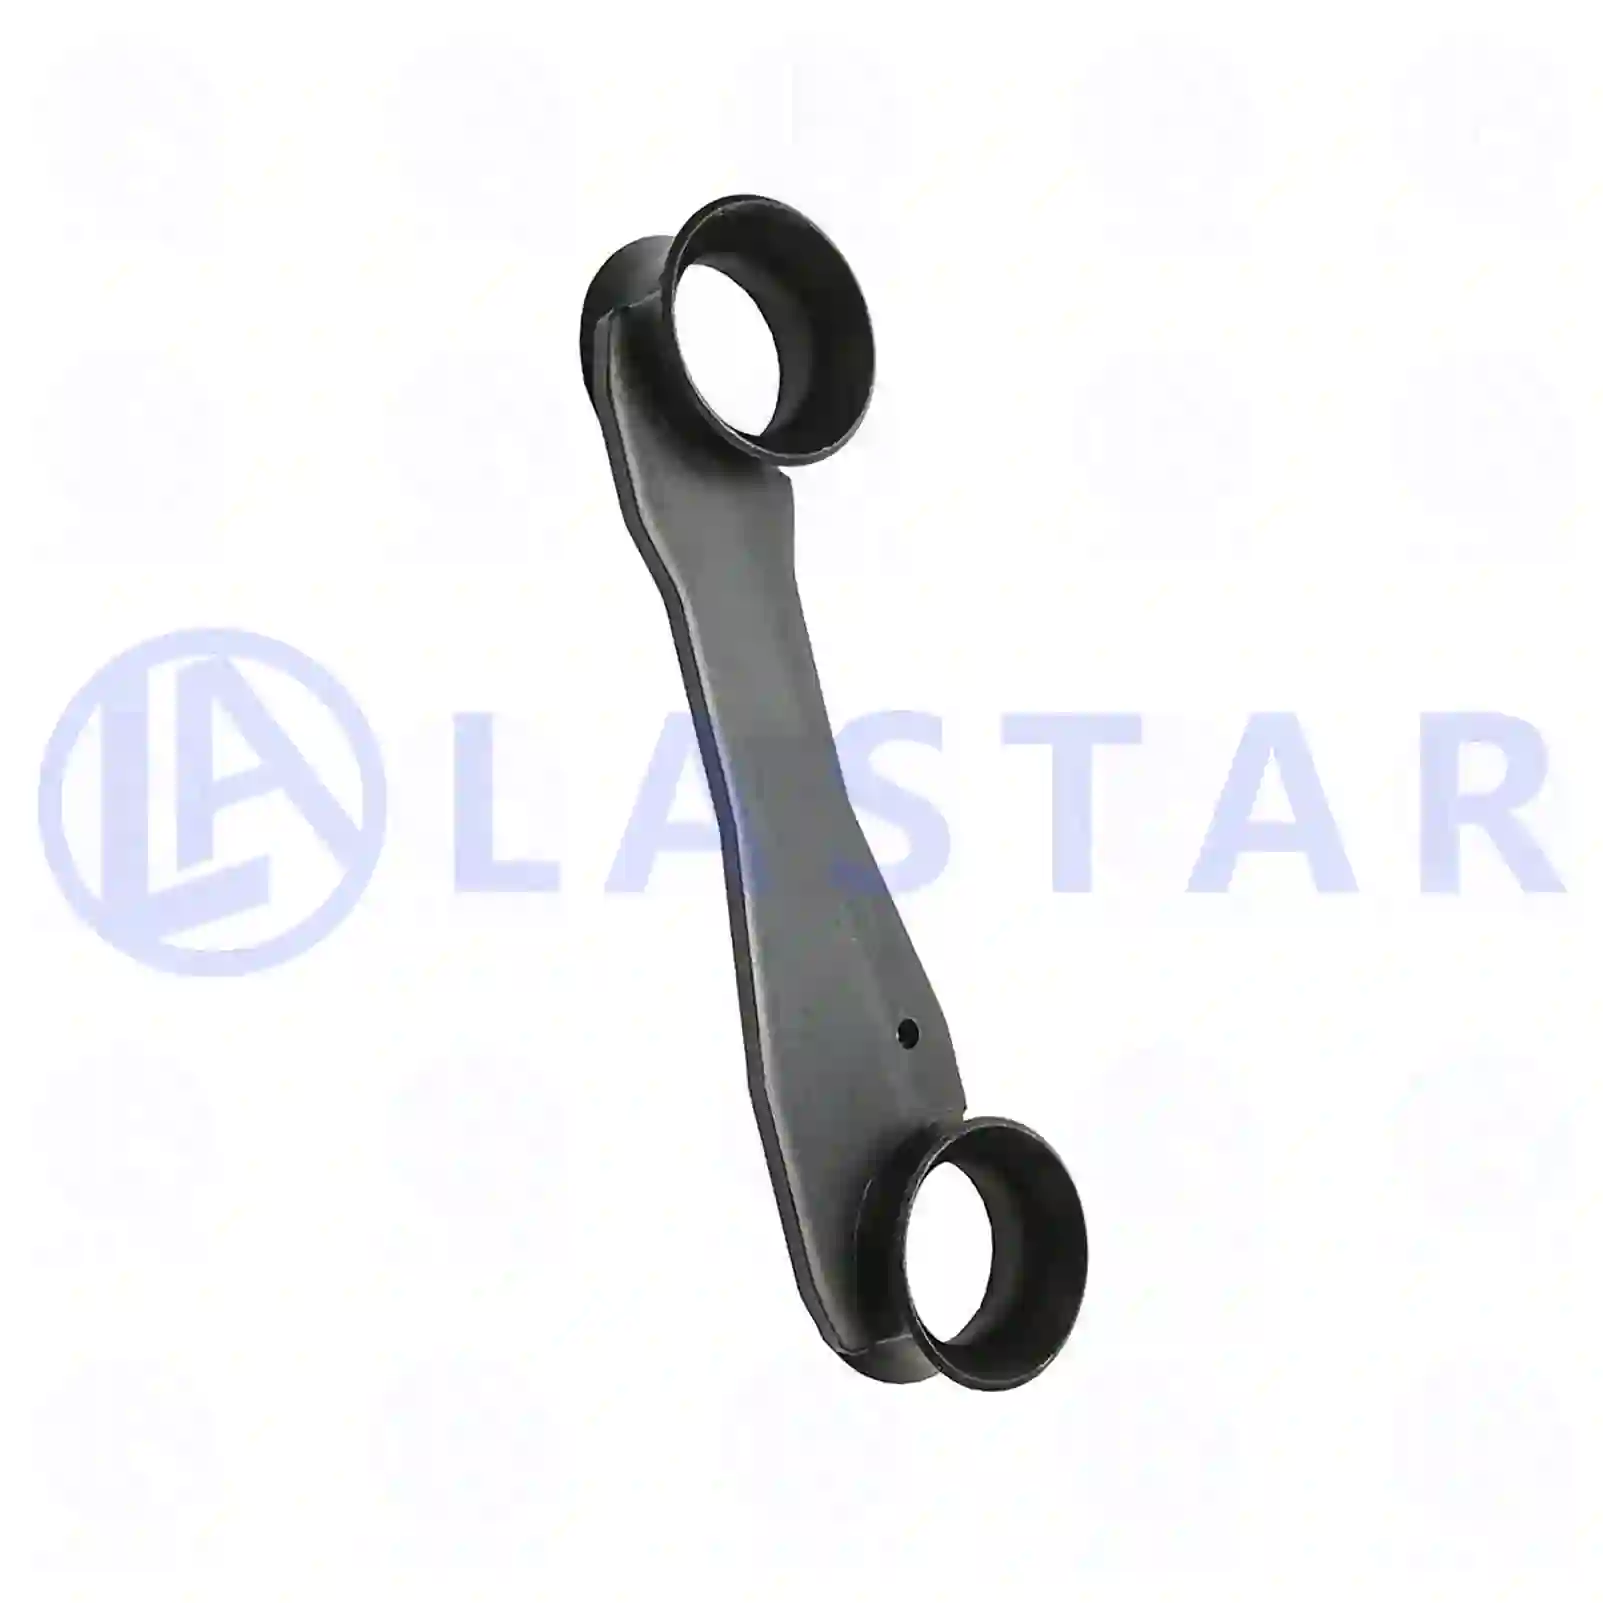 Connecting rod, cabin air suspension, 77735910, 1343131, 1781929, ZG41233-0008 ||  77735910 Lastar Spare Part | Truck Spare Parts, Auotomotive Spare Parts Connecting rod, cabin air suspension, 77735910, 1343131, 1781929, ZG41233-0008 ||  77735910 Lastar Spare Part | Truck Spare Parts, Auotomotive Spare Parts